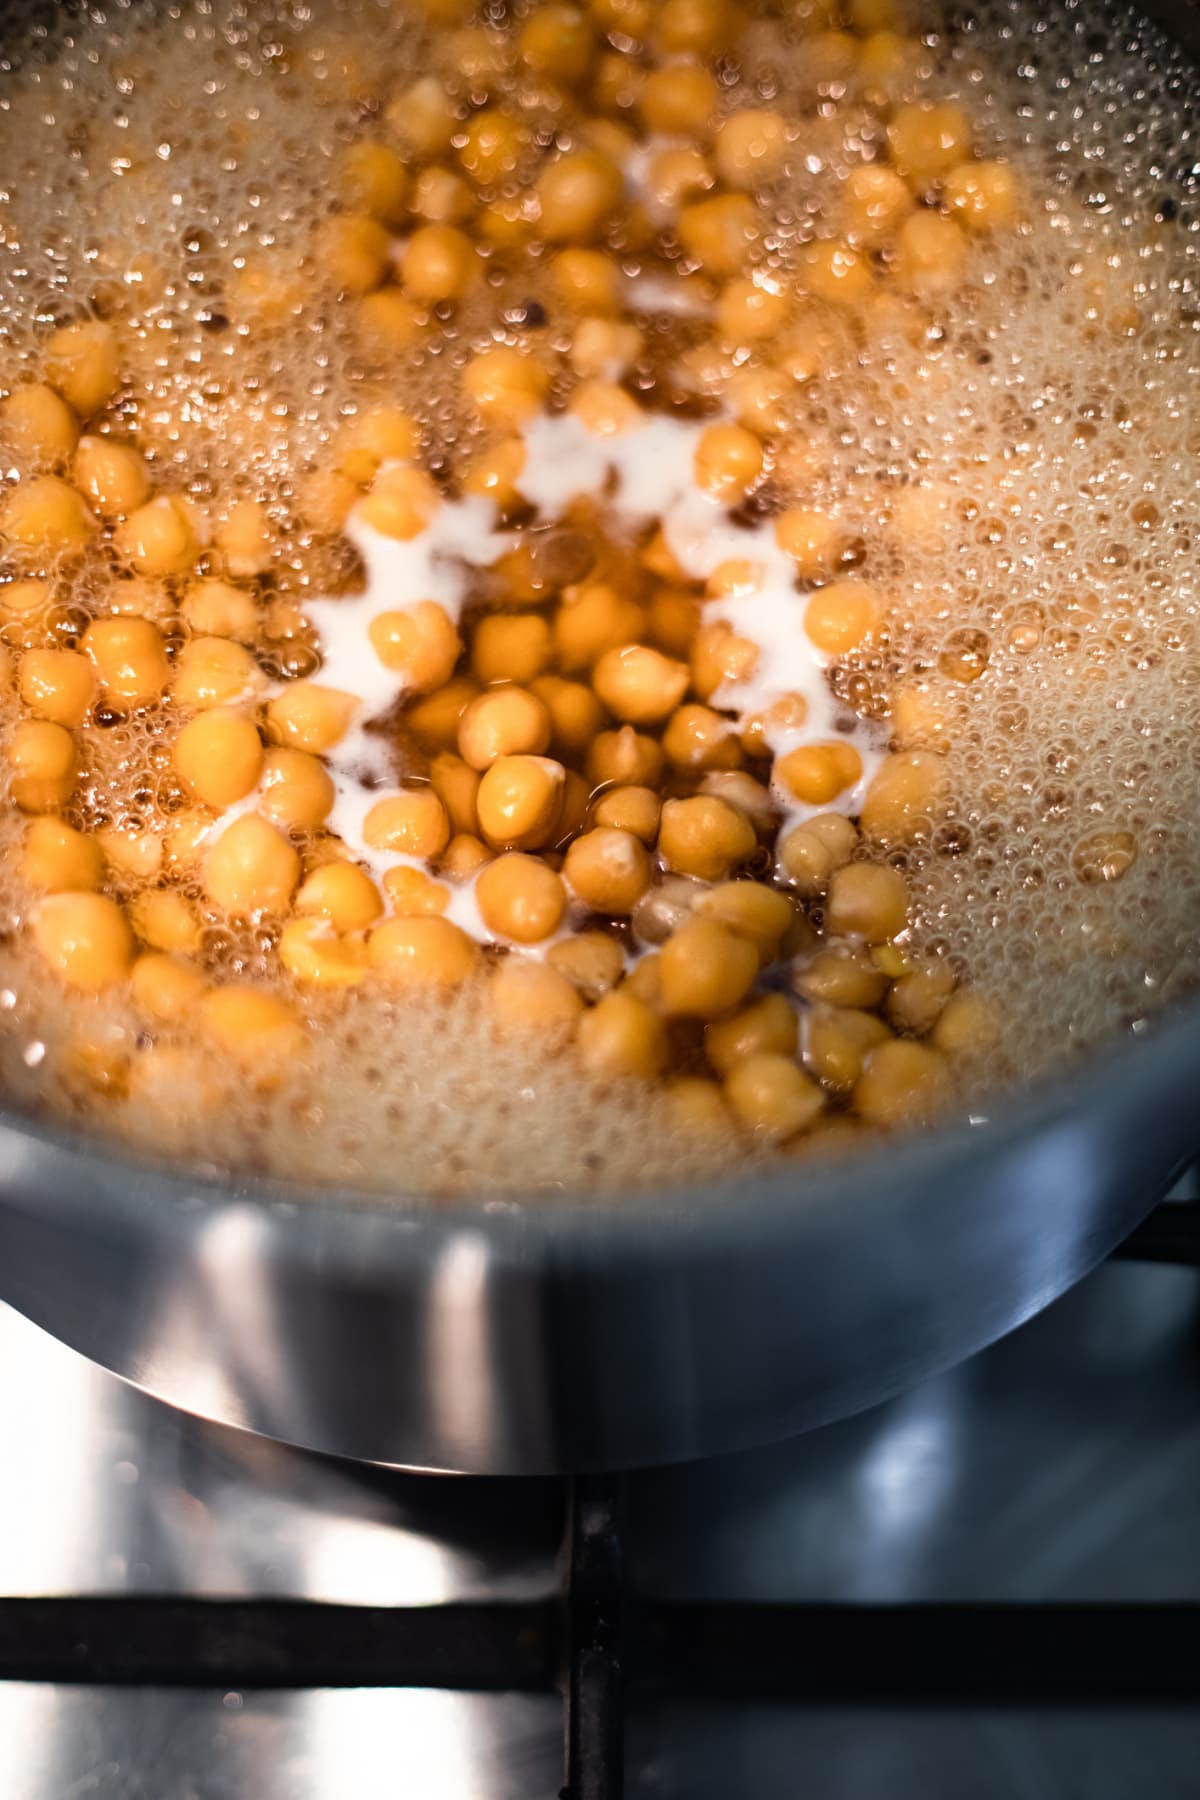 Chickpeas boiling in water